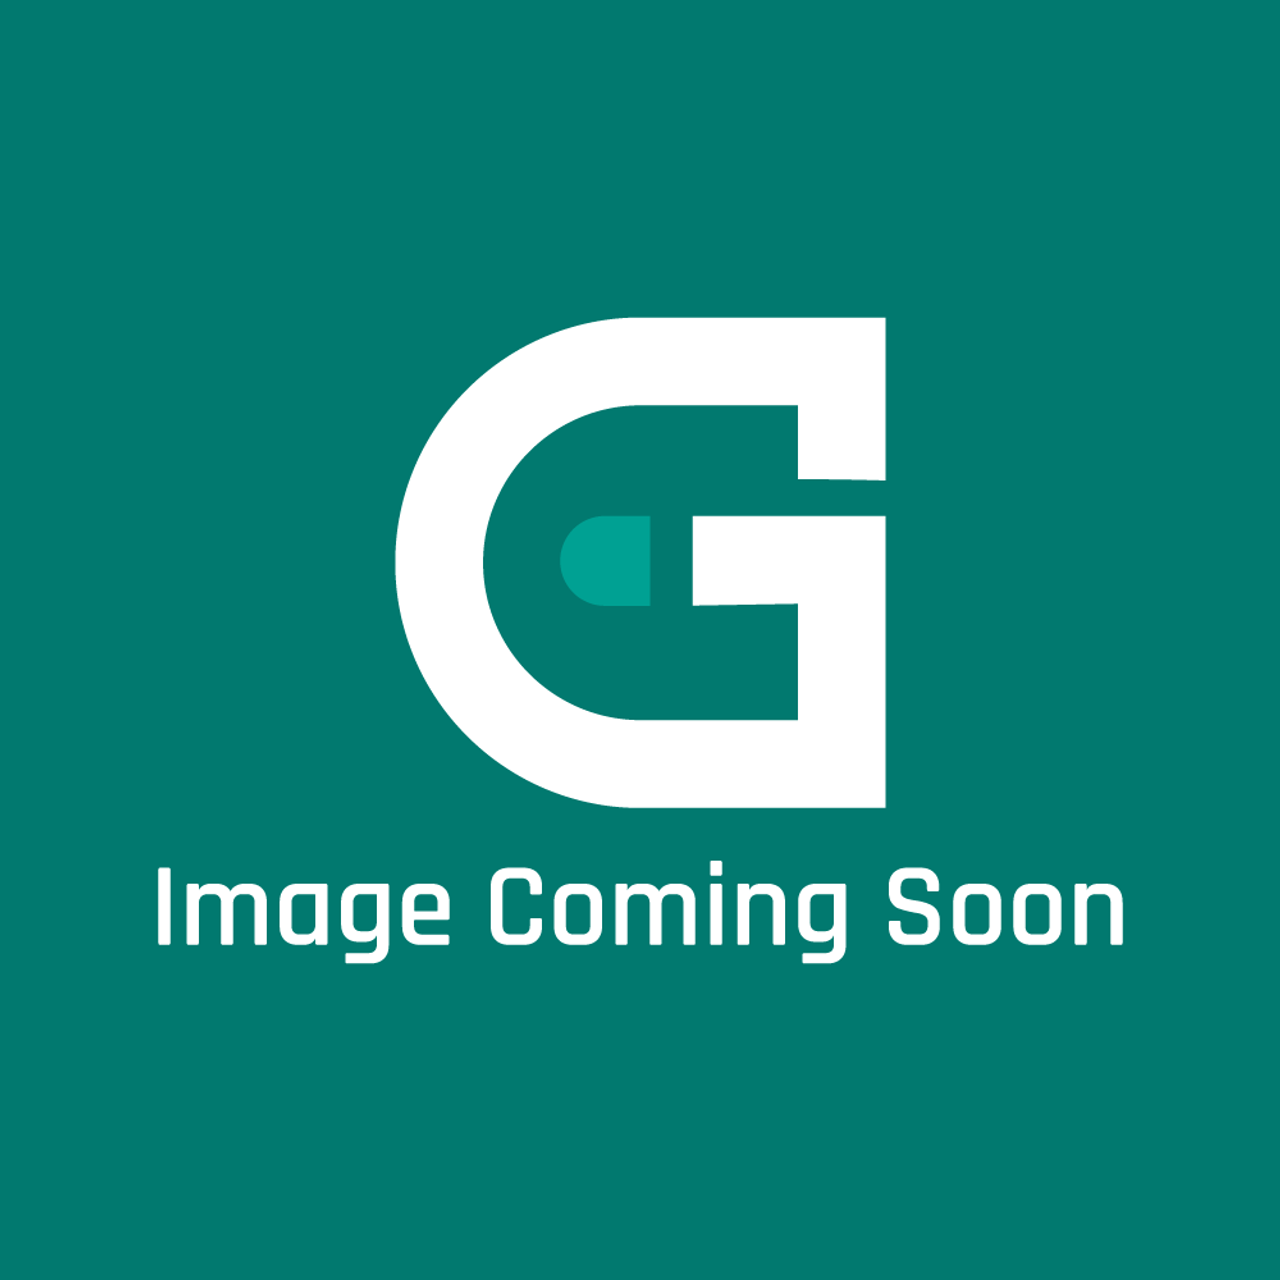 AGA Marvel DGSG03710 - Rubber Gasket 5Mm Thick C1657 - Image Coming Soon!